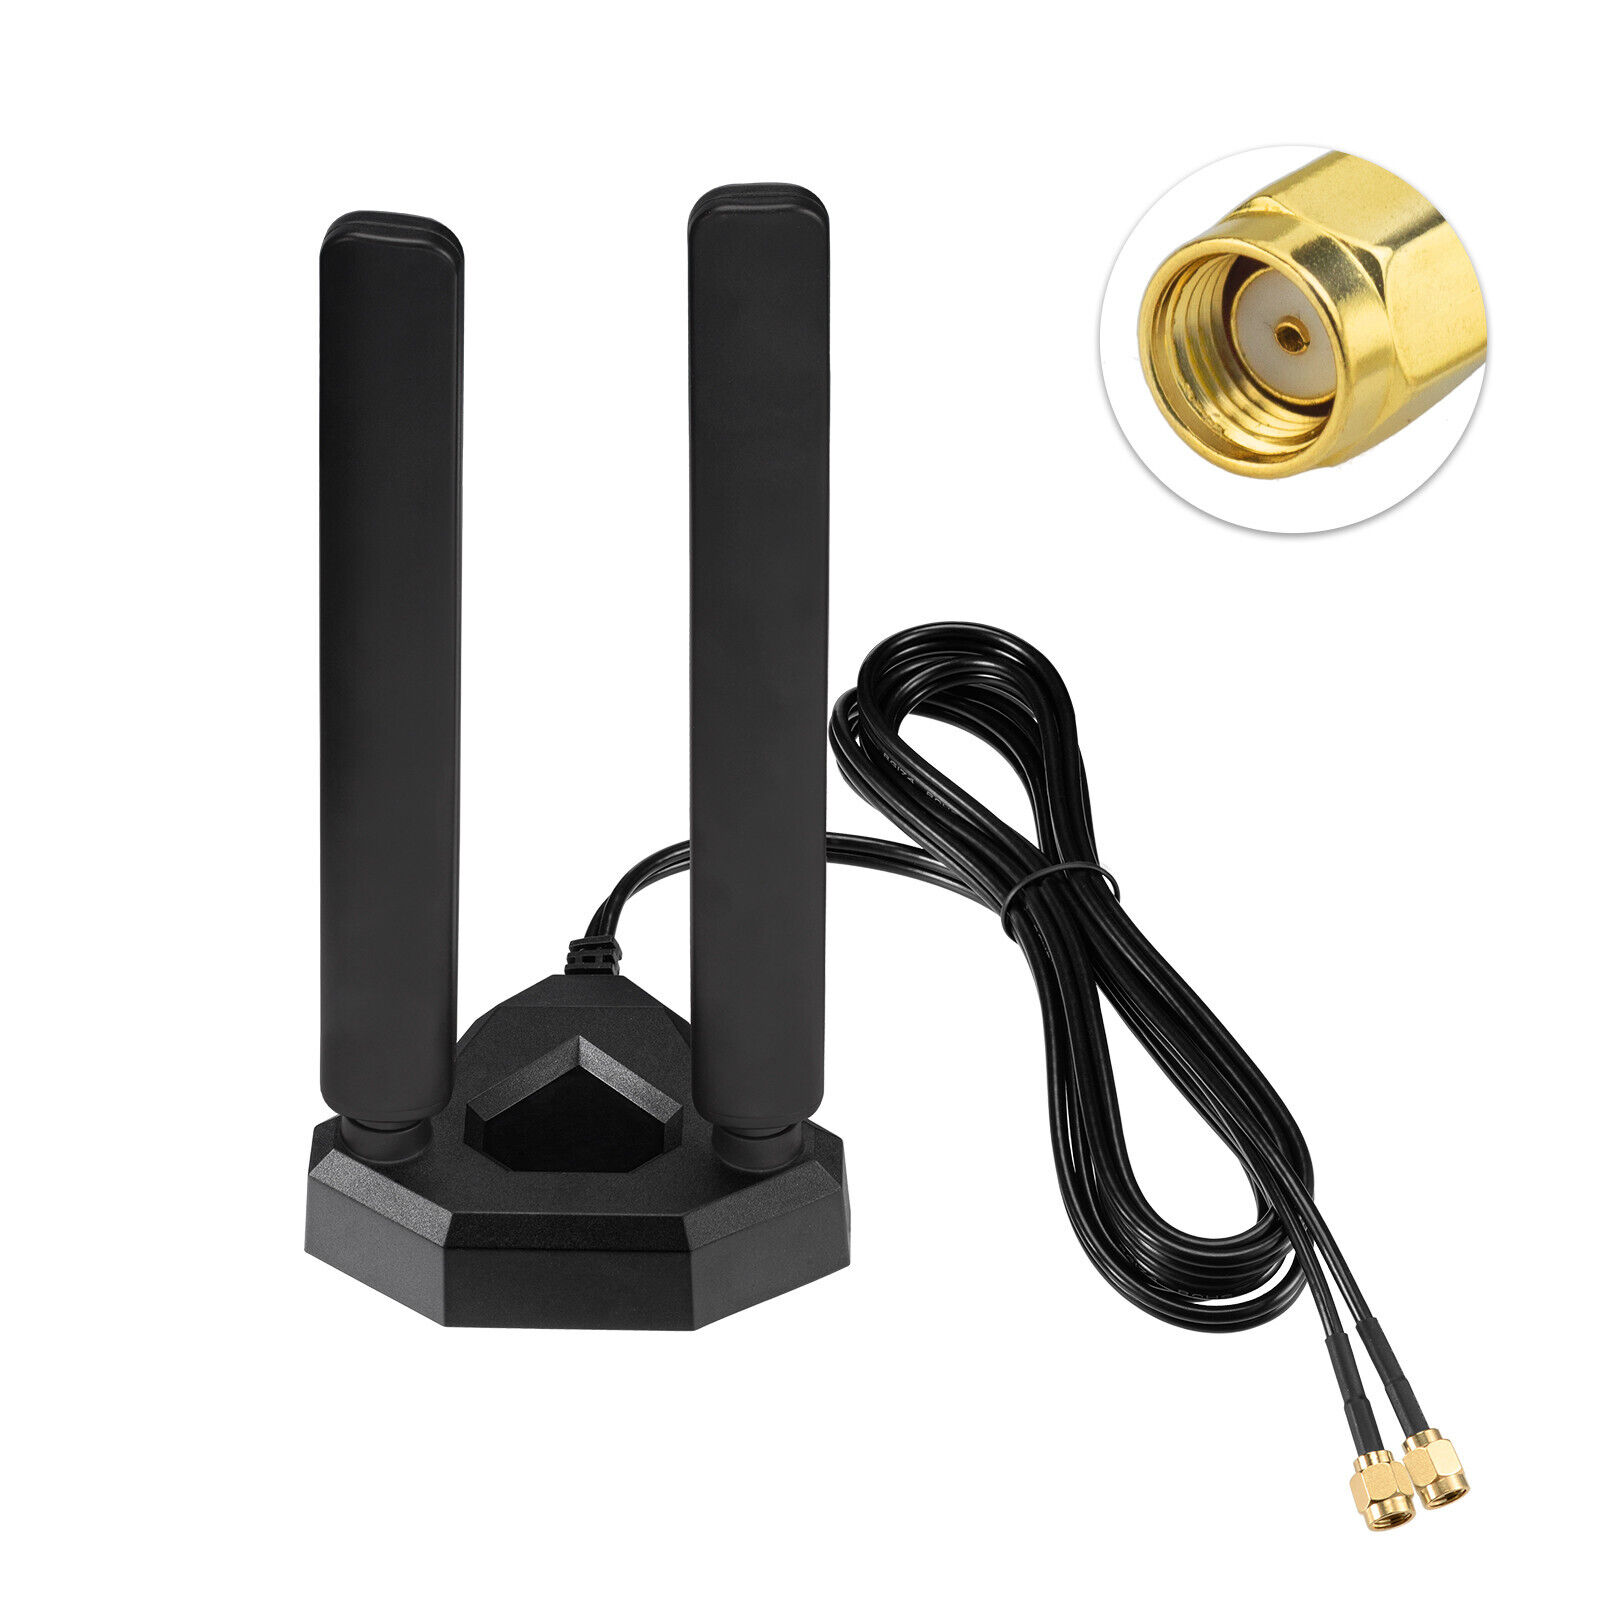 WiFi 6E Tri-Band 6GHz 5GHz 2.4GHz Gaming Antenna Magnetic for PC Desktop PCIe